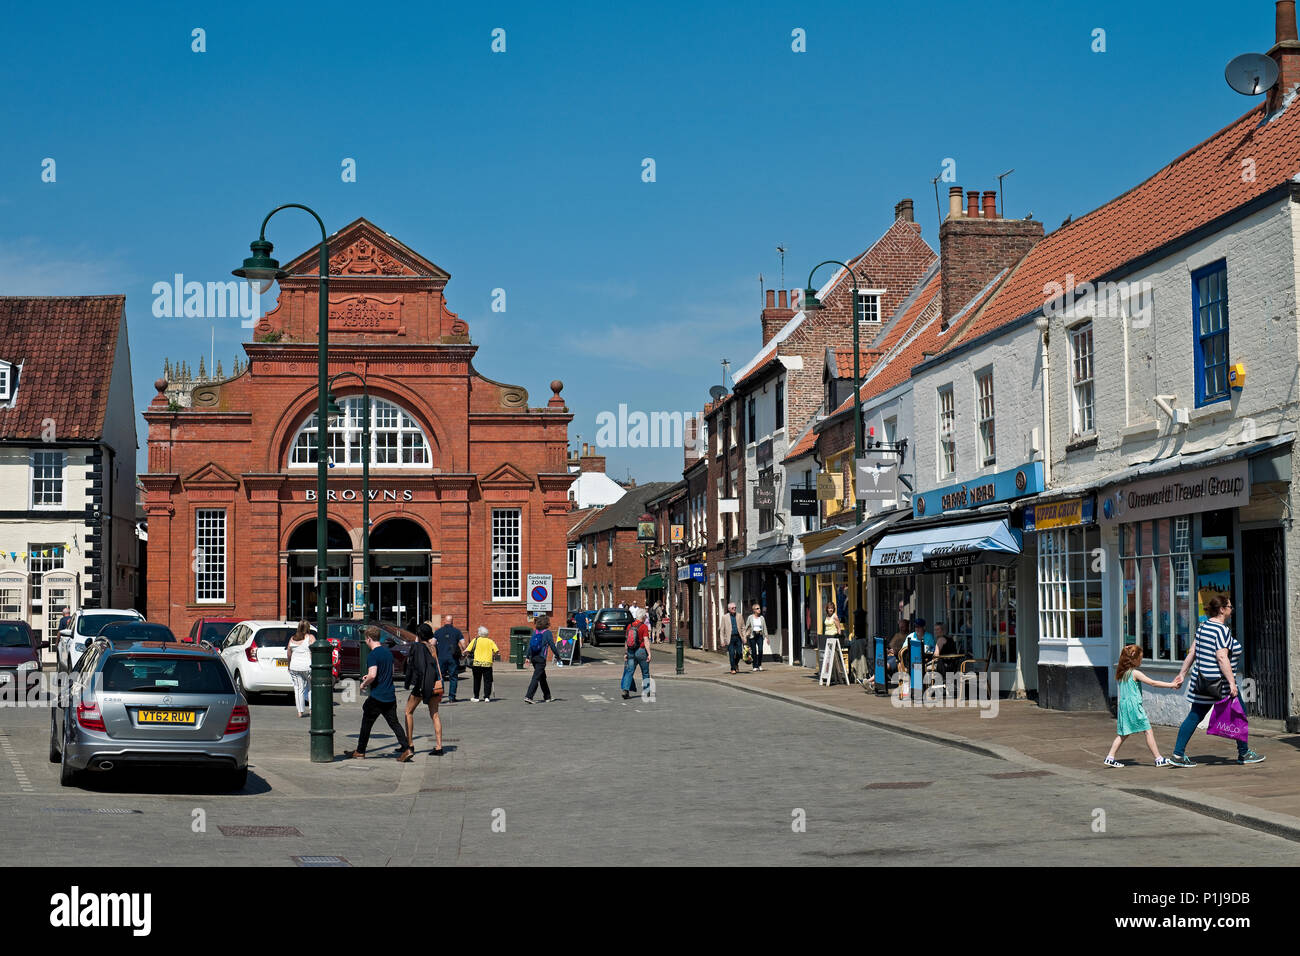 Shops stores in the town centre in spring Ladygate Beverley East Yorkshire England UK United Kingdom GB Great Britain Stock Photo